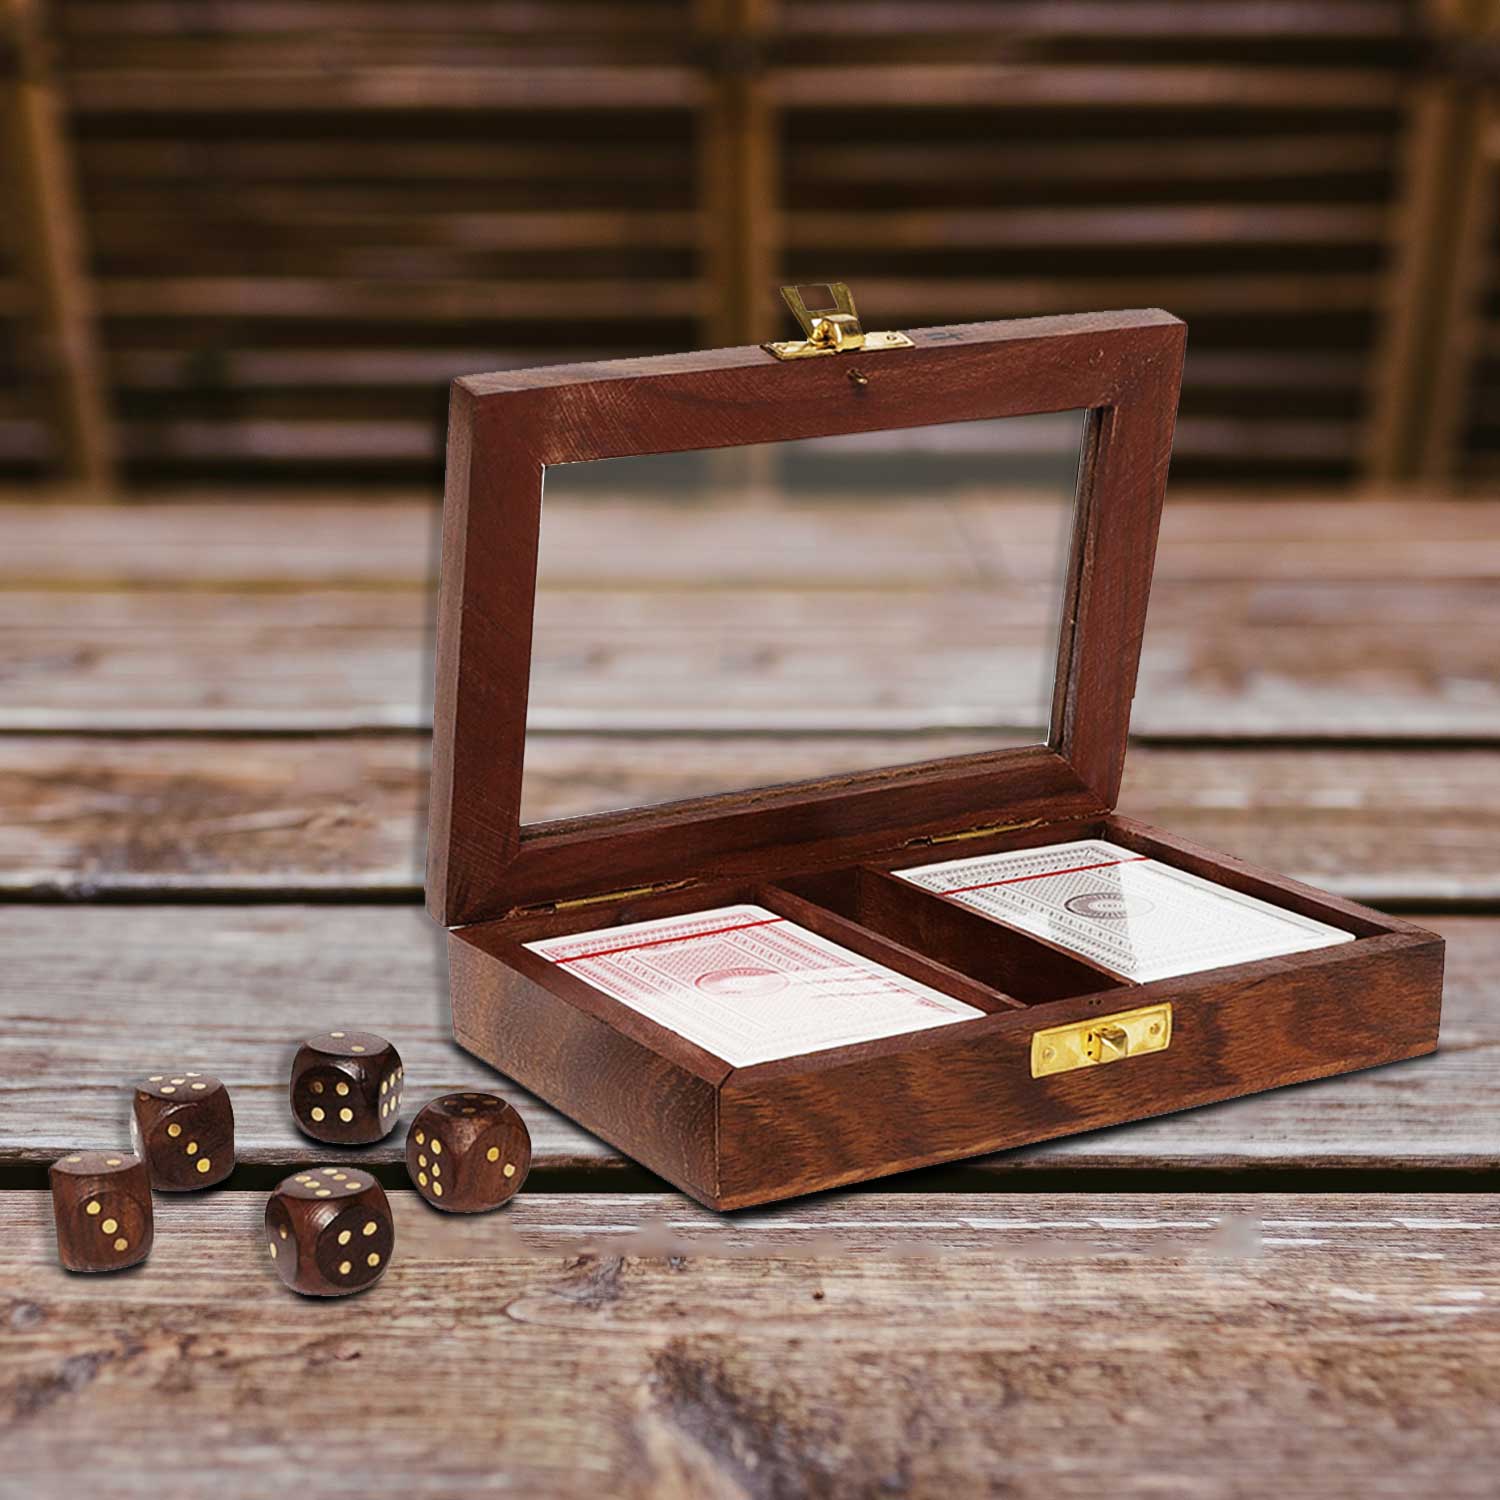 card set with dices in wooden box